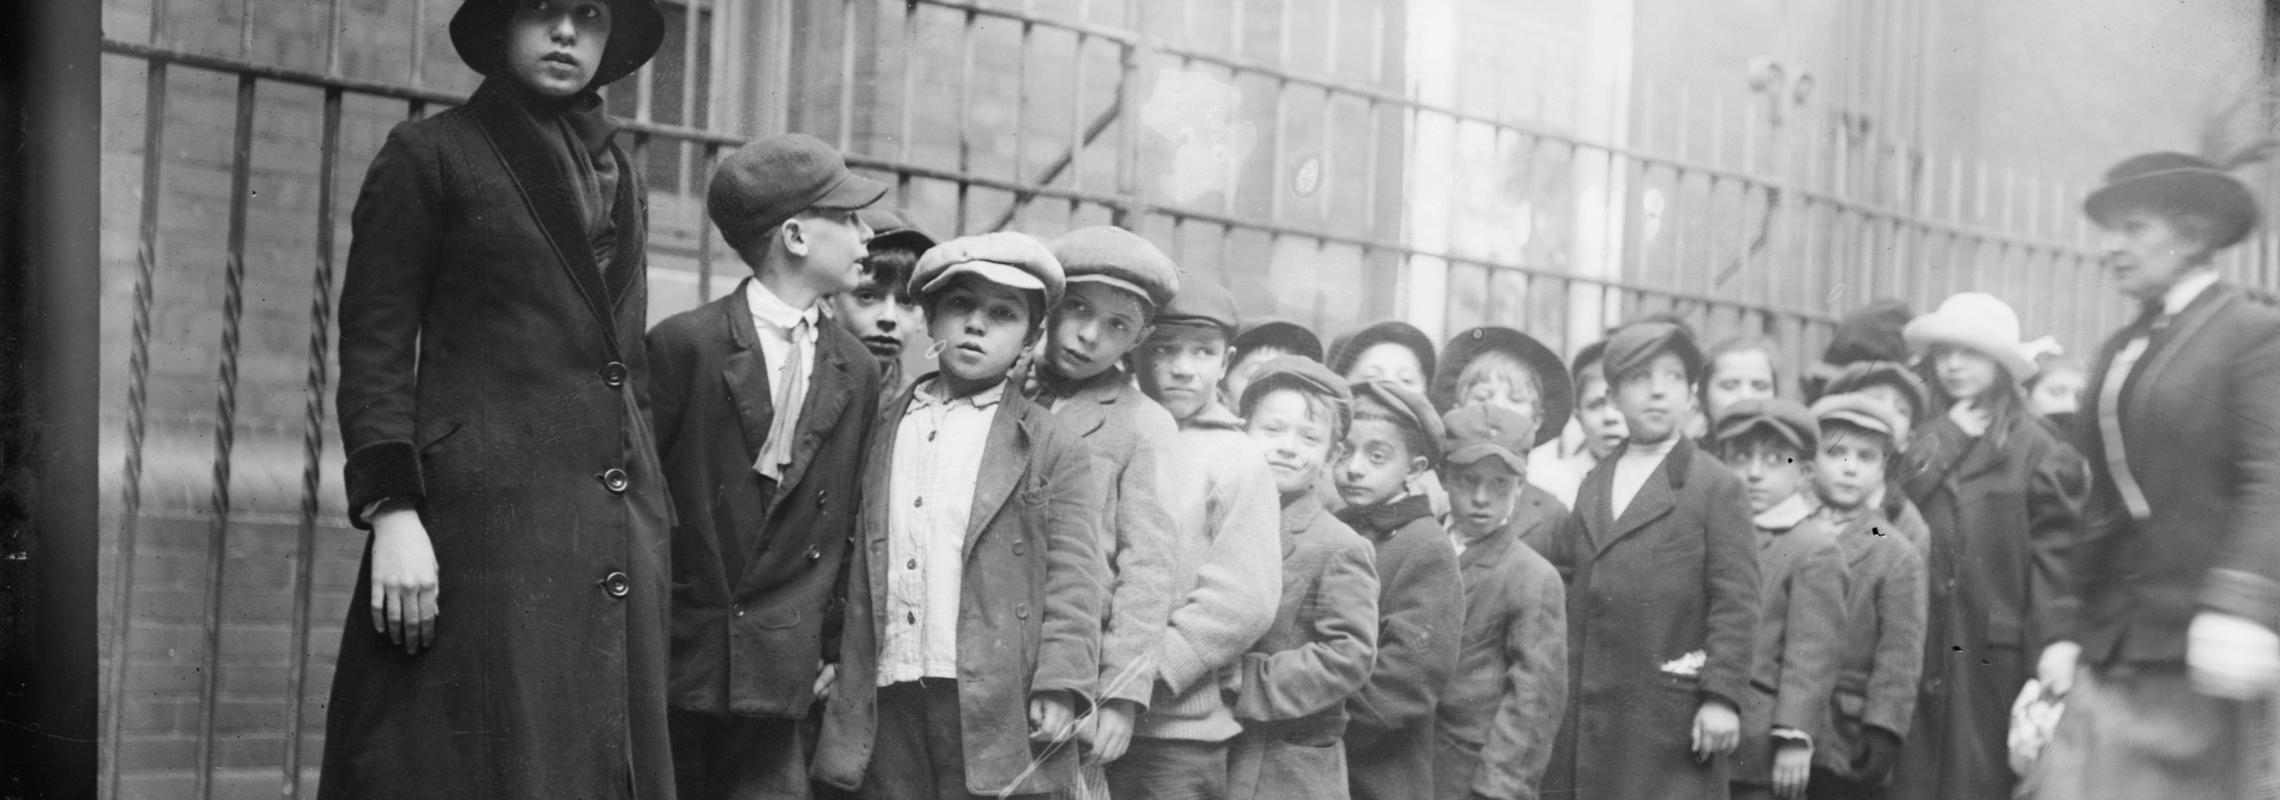 Orphans in New York City